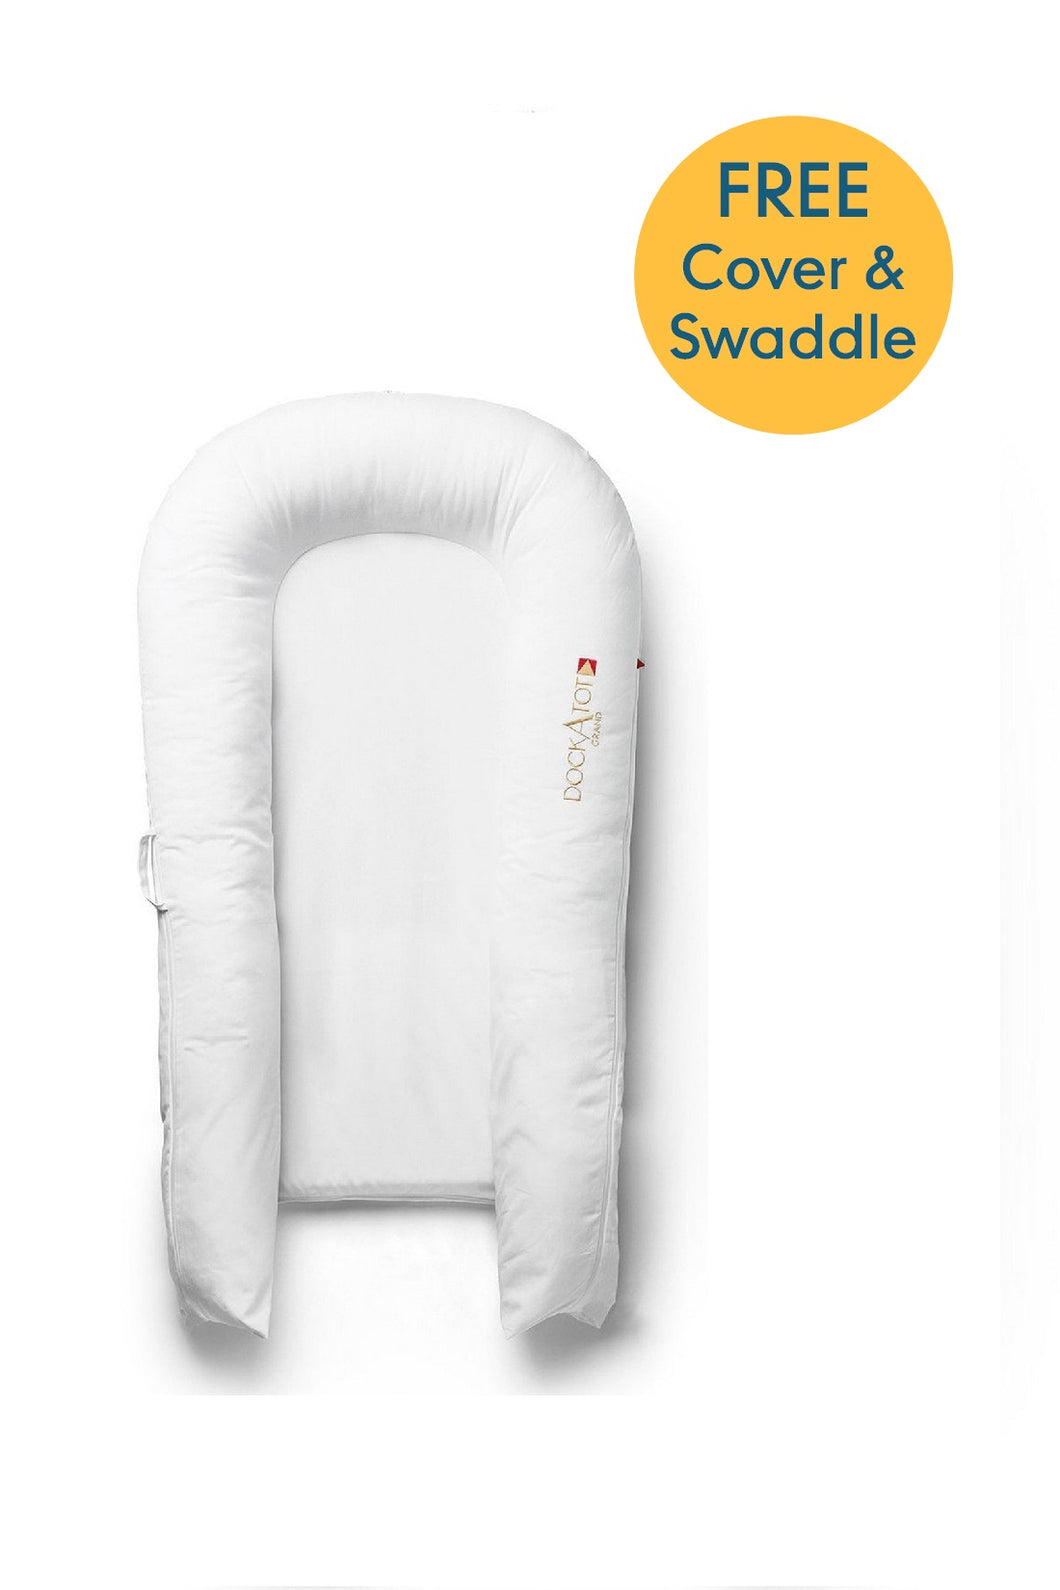 Dockatot Grand Dock - Pristine White 9-36 Months (Free Cover and Swaddle)